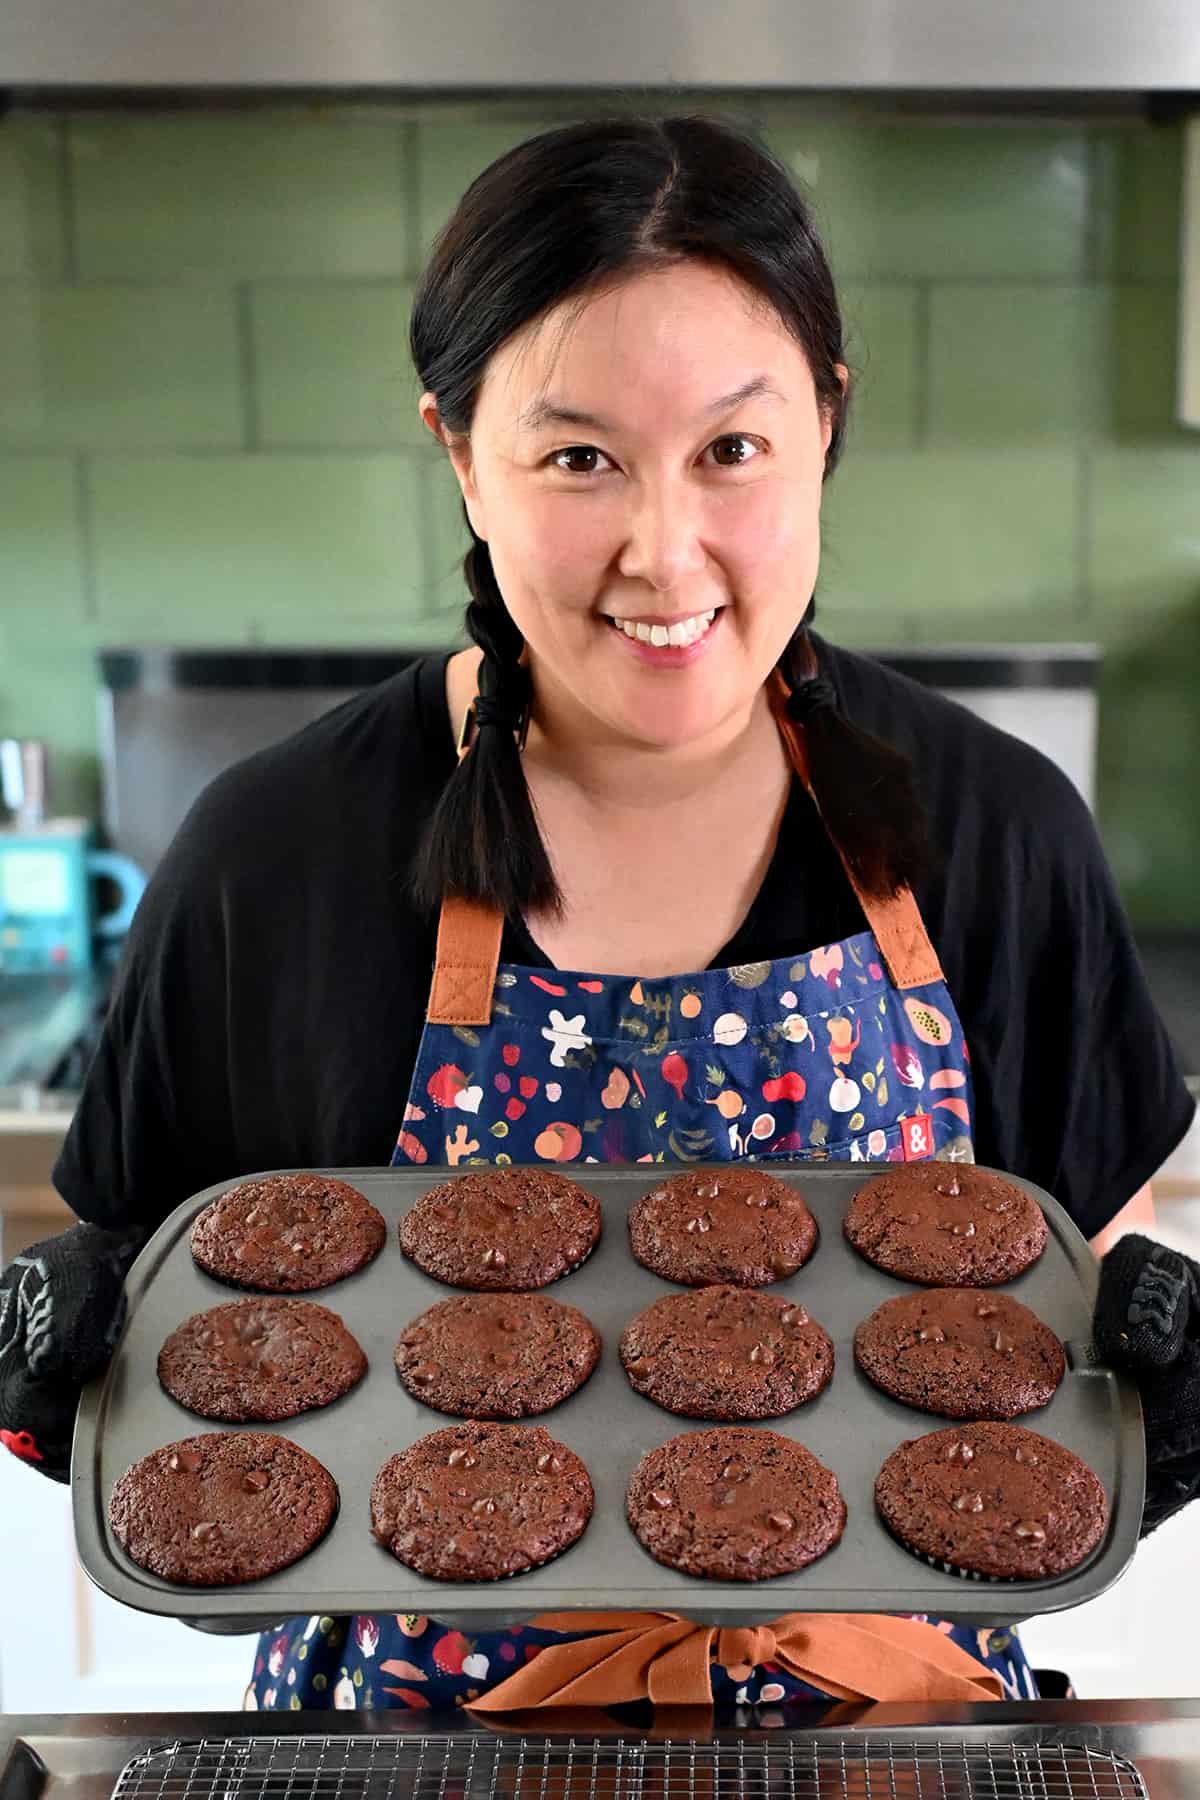 A smiling Asian woman in braids is holding up a muffin pan filled with paleo chocolate zucchini muffins.